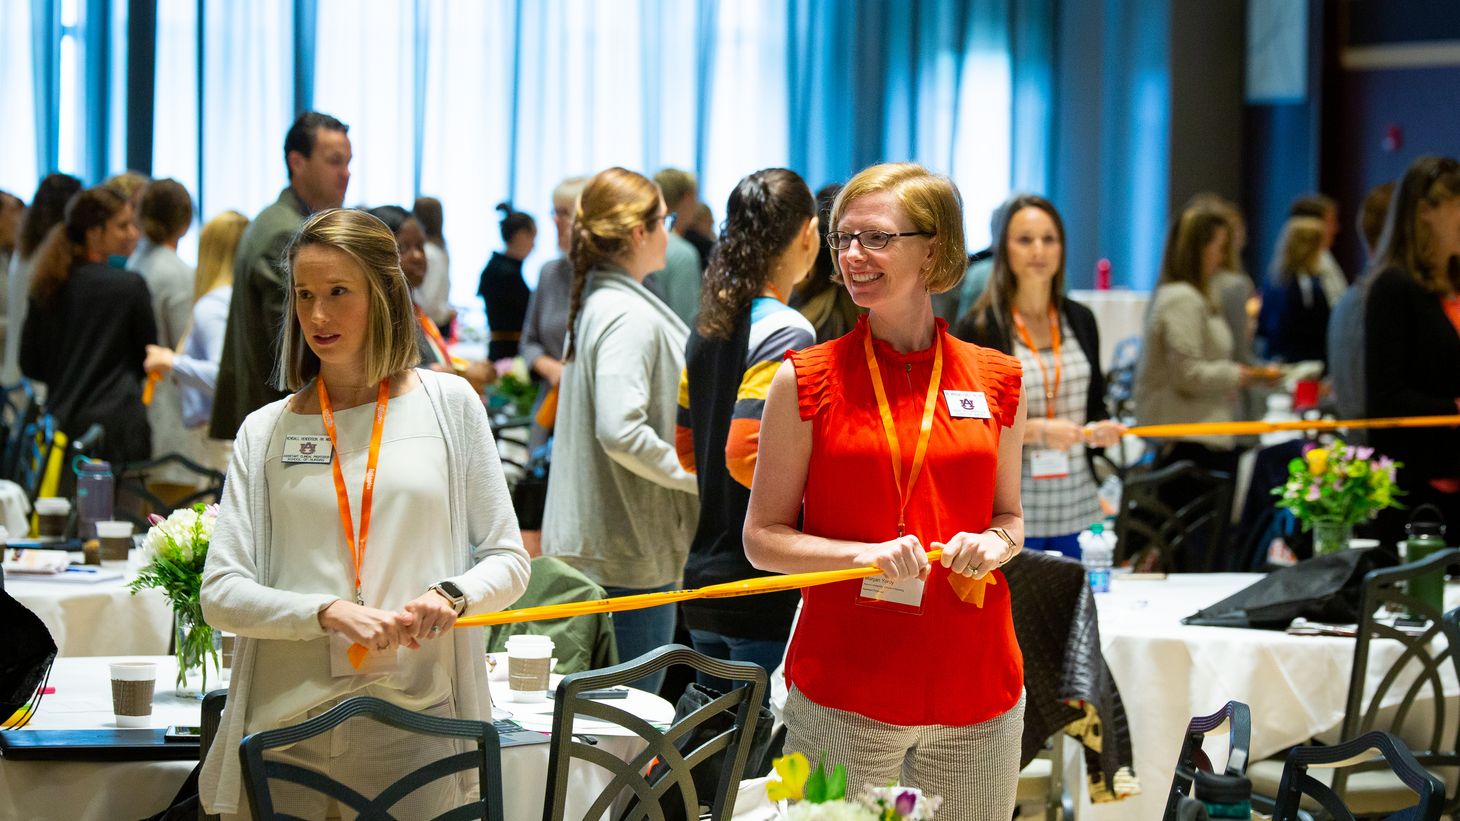 attendees participate in wellness activity at BHAC Summit